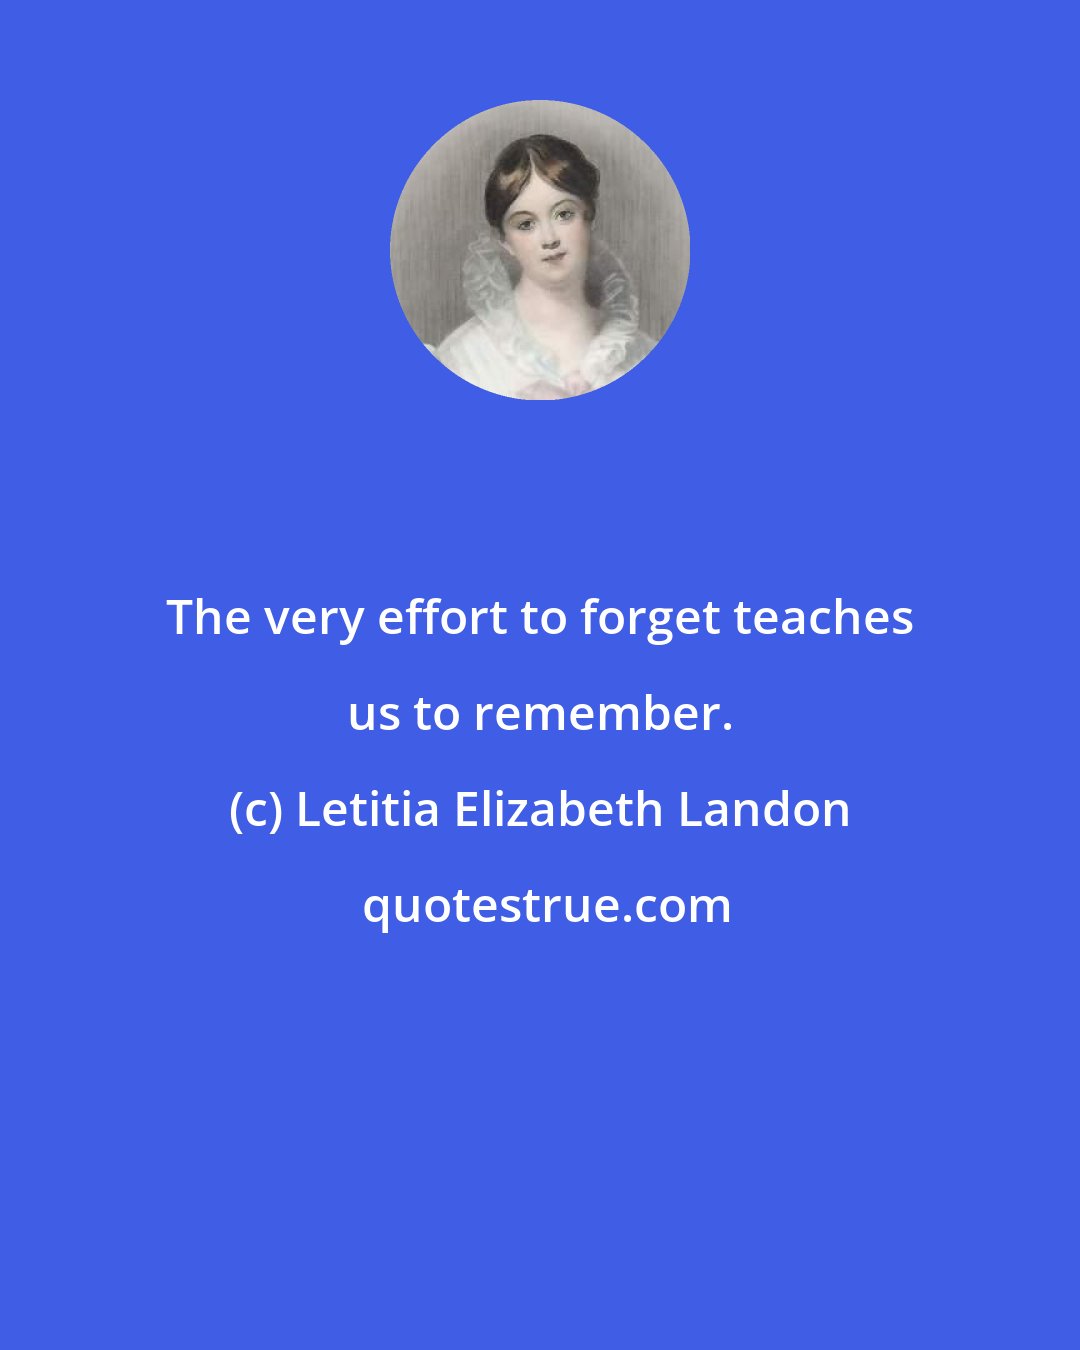 Letitia Elizabeth Landon: The very effort to forget teaches us to remember.